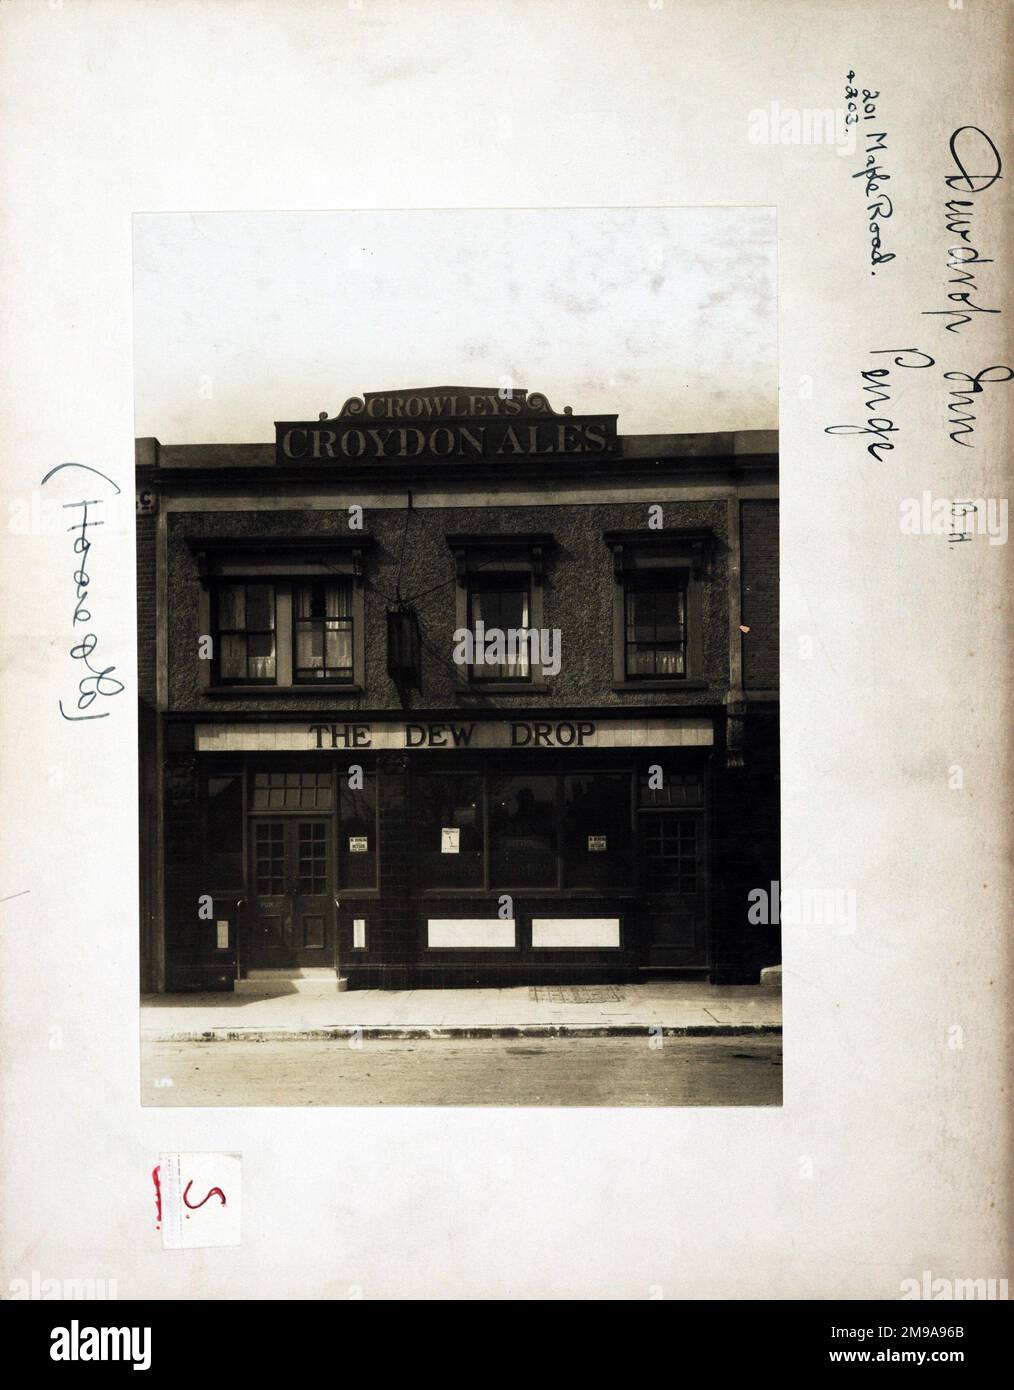 Photograph of Dew Drop PH, Penge, London. The main side of the print (shown here) depicts: Face on view of the pub.  The back of the print (available on request) details: Trading Record 1934. 1961 for the Dew Drop, Penge, London SE20 8HU. As of July 2018 . Part (201.203) converted to clothes shop and part (205) to carpet shop. Clothes shop since converted to 'Loafe' cafe in December 2012, renamed 'Blue Mountain Cafe' by November 2013. Carpet shop empty 2014. Stock Photo